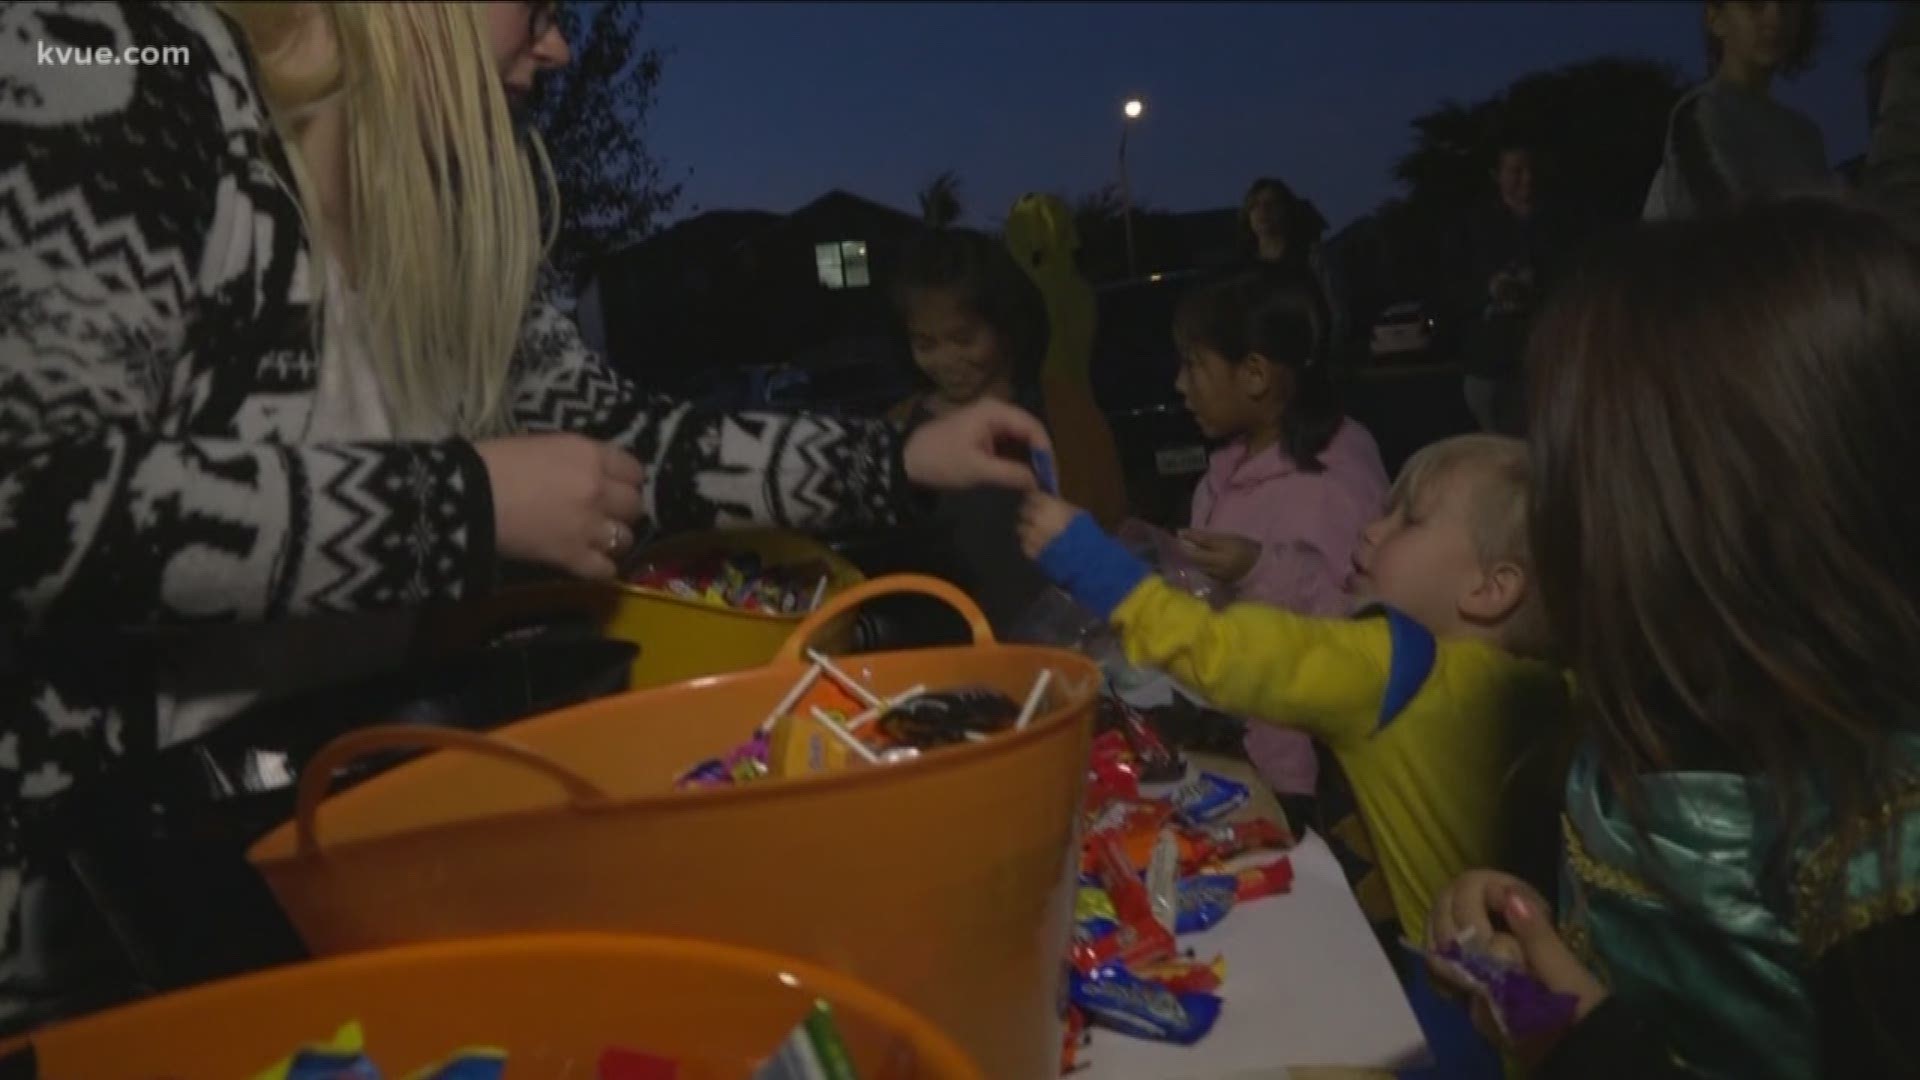 It was too cold for some on Thursday night, so a Round Rock neighborhood had a second trick-or-treating event.